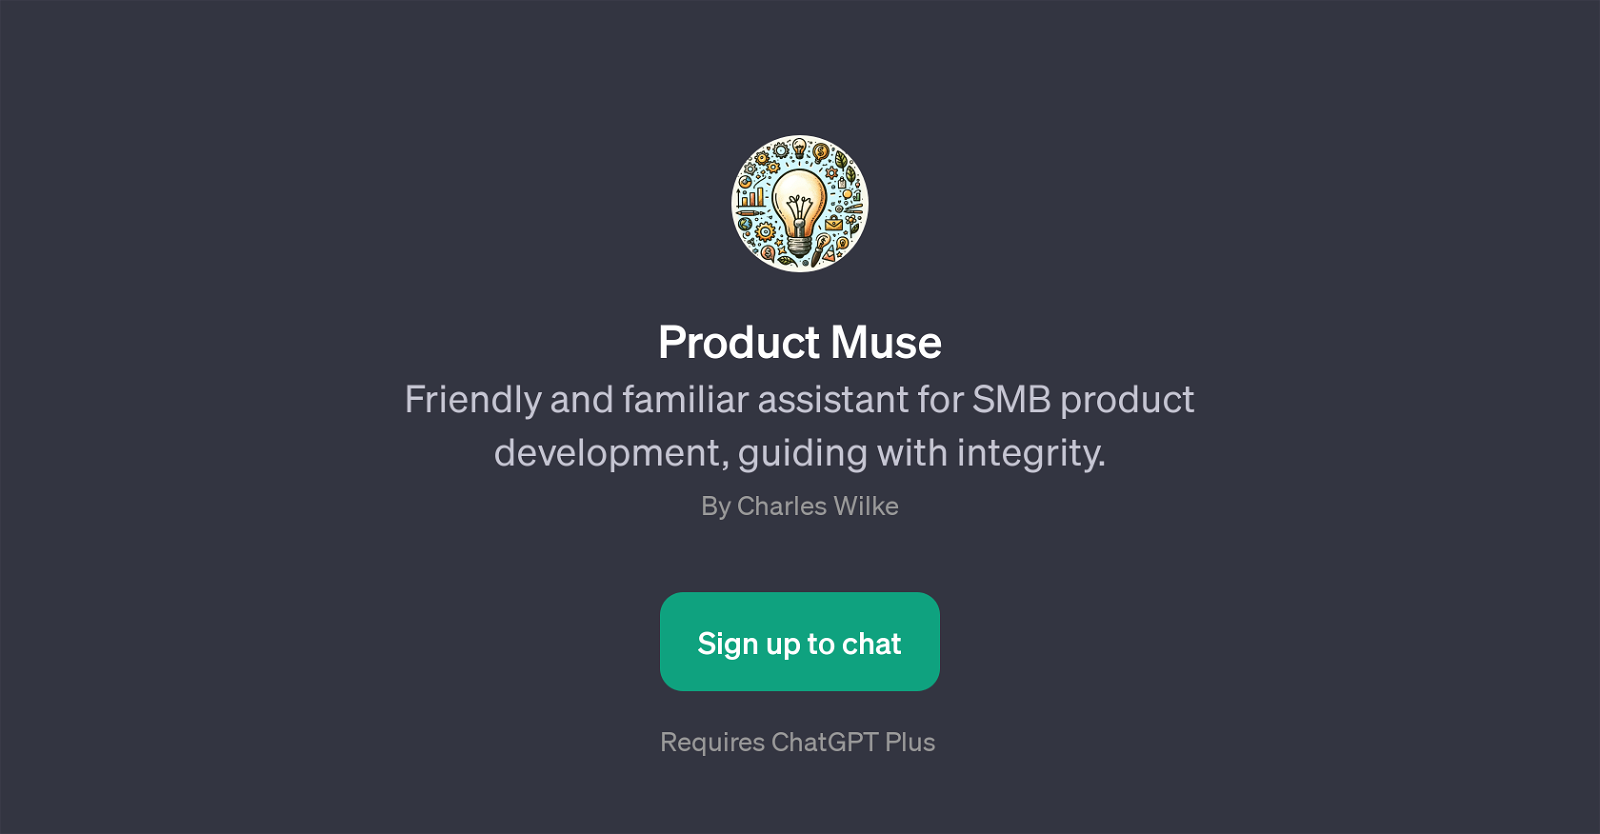 Product Muse website